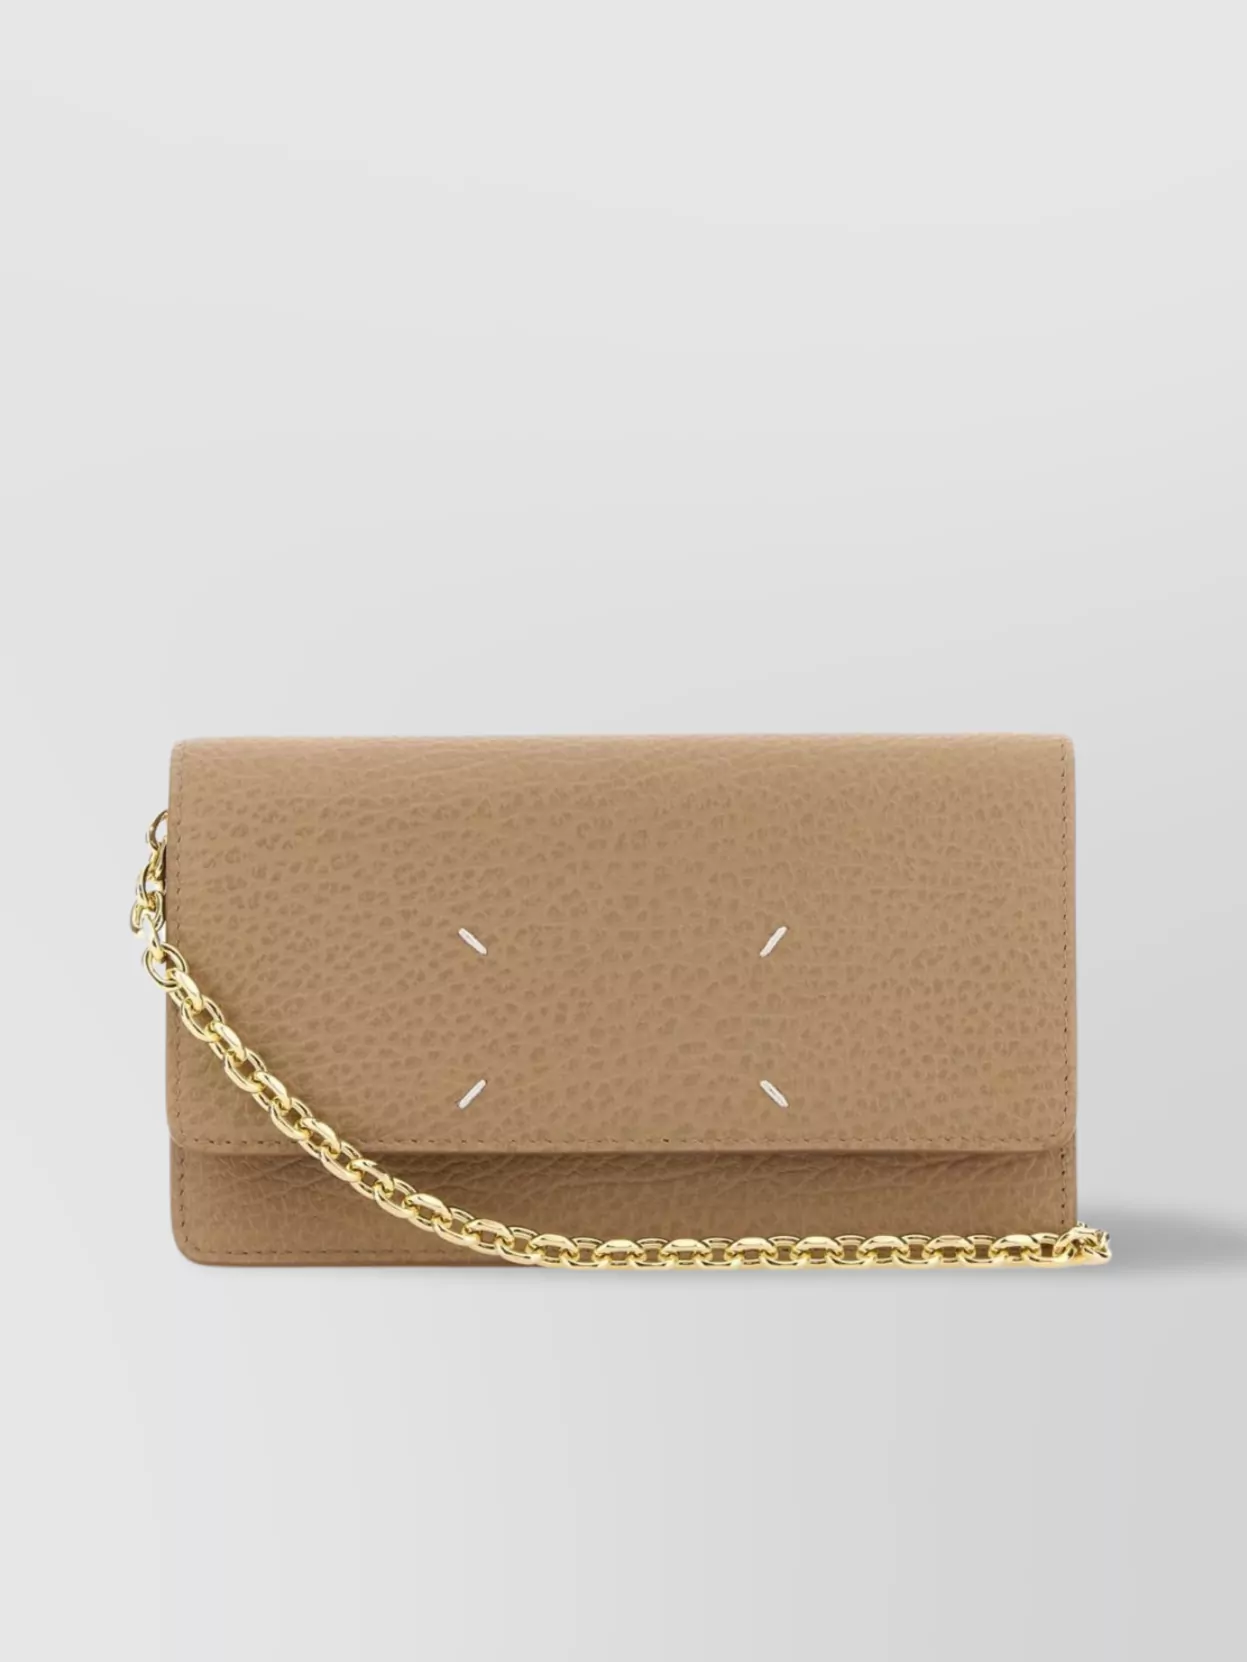 Shop Maison Margiela Leather Clutch With Textured Chain Strap